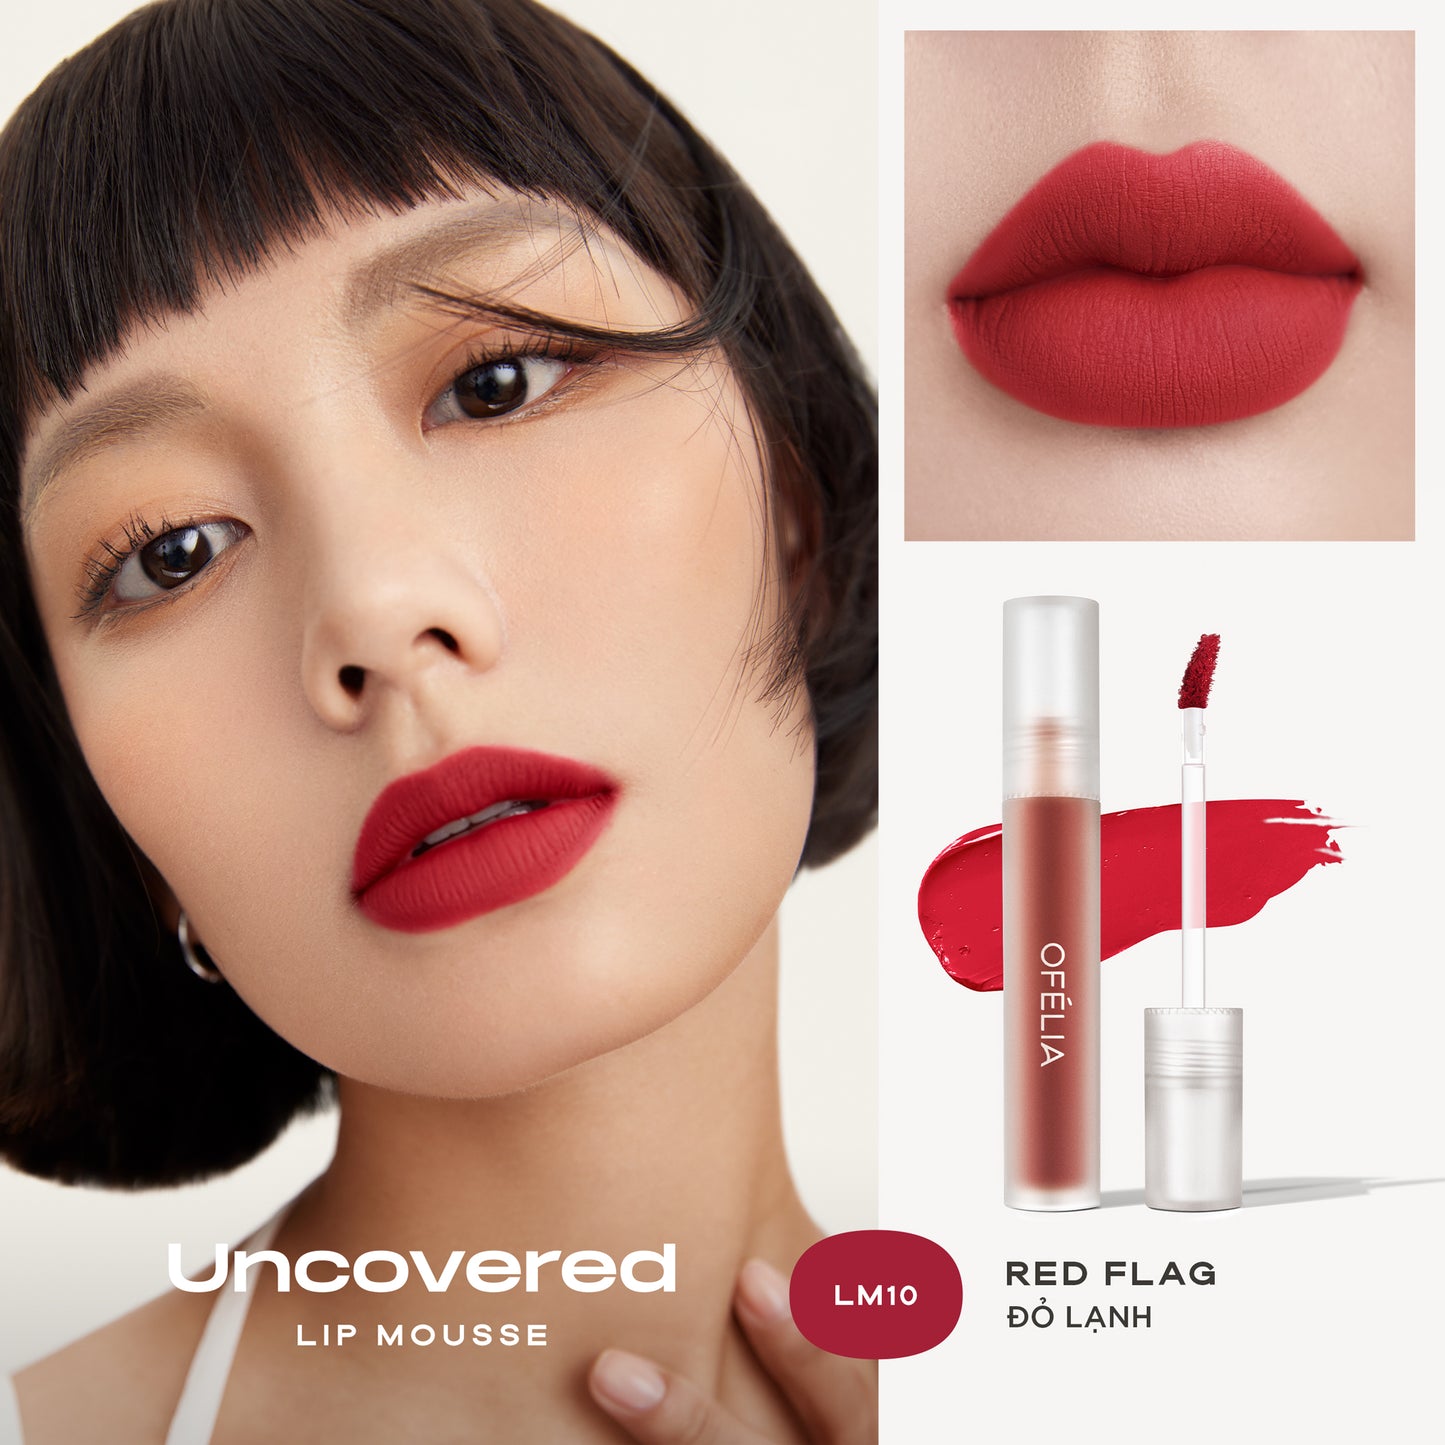 SET 2 UNCOVERED LIP MOUSSE CHAPTER 02